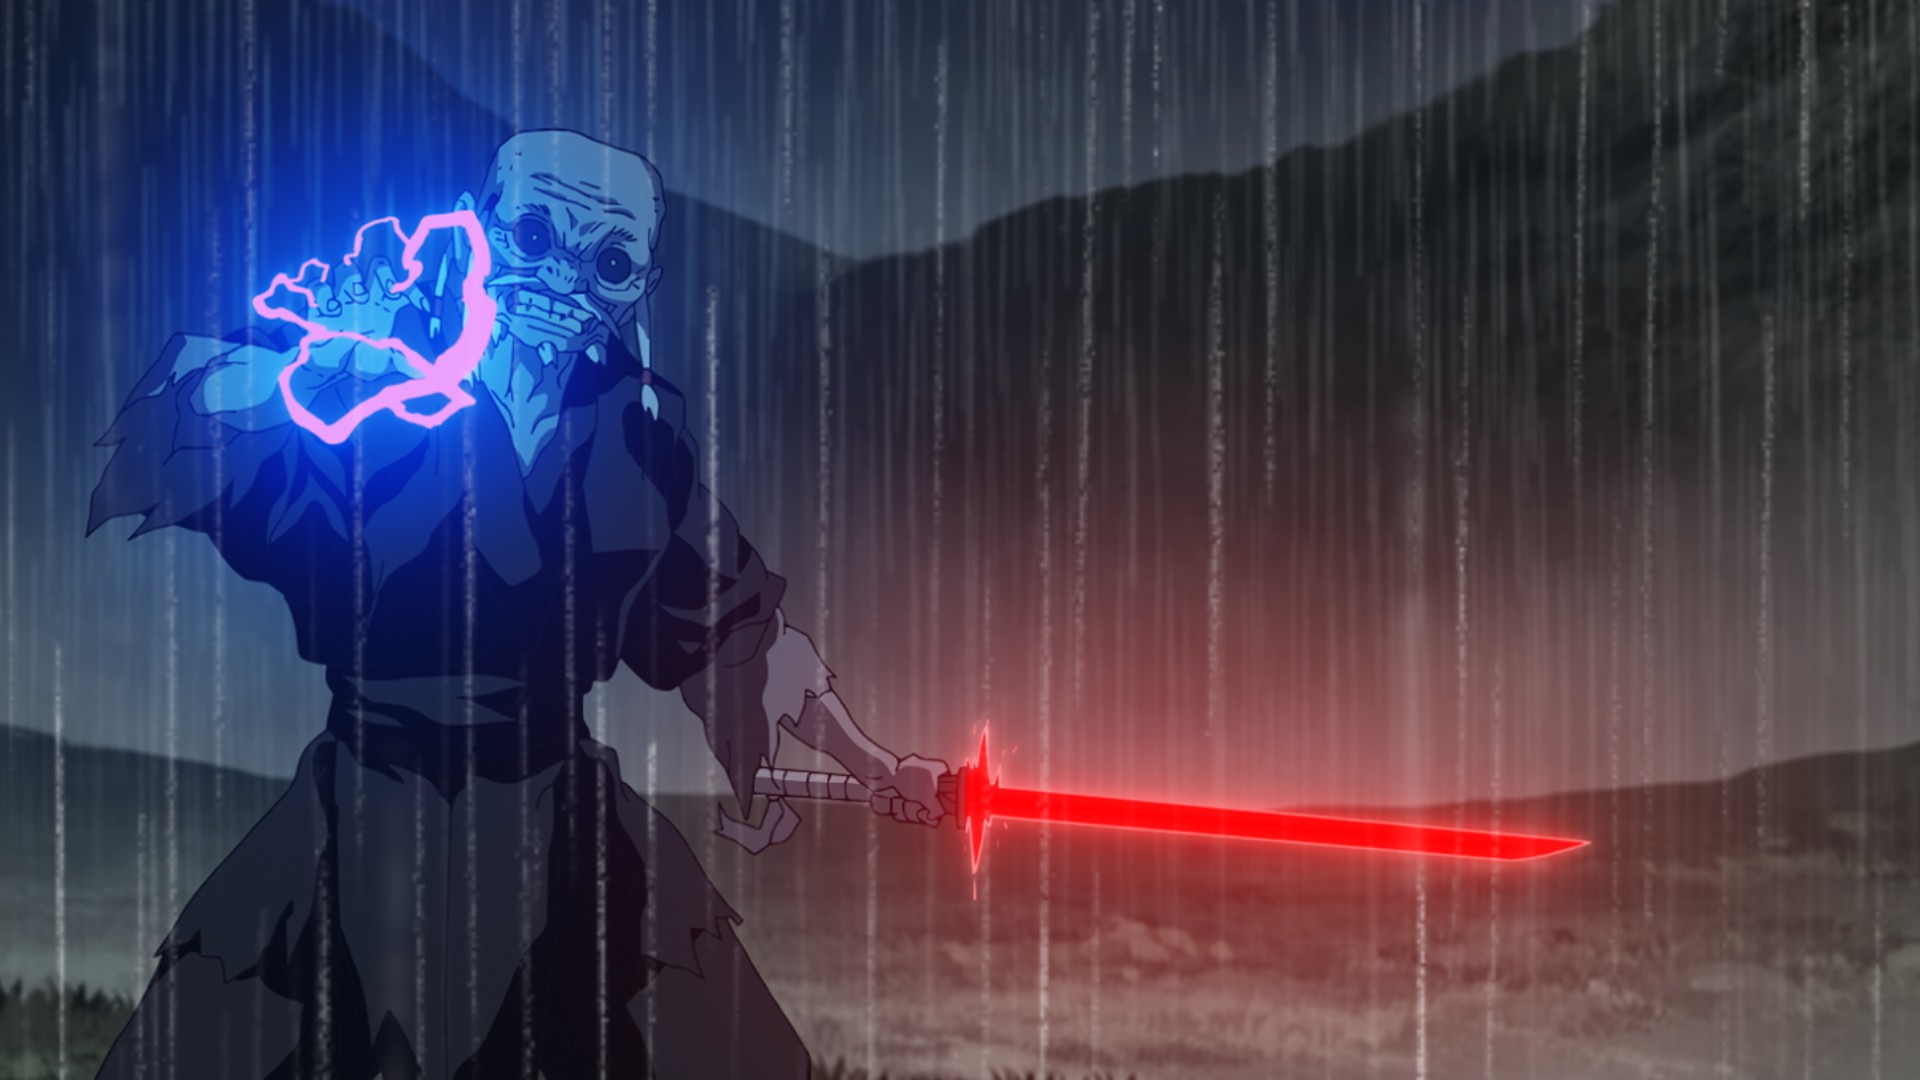 Star Wars Visions anime